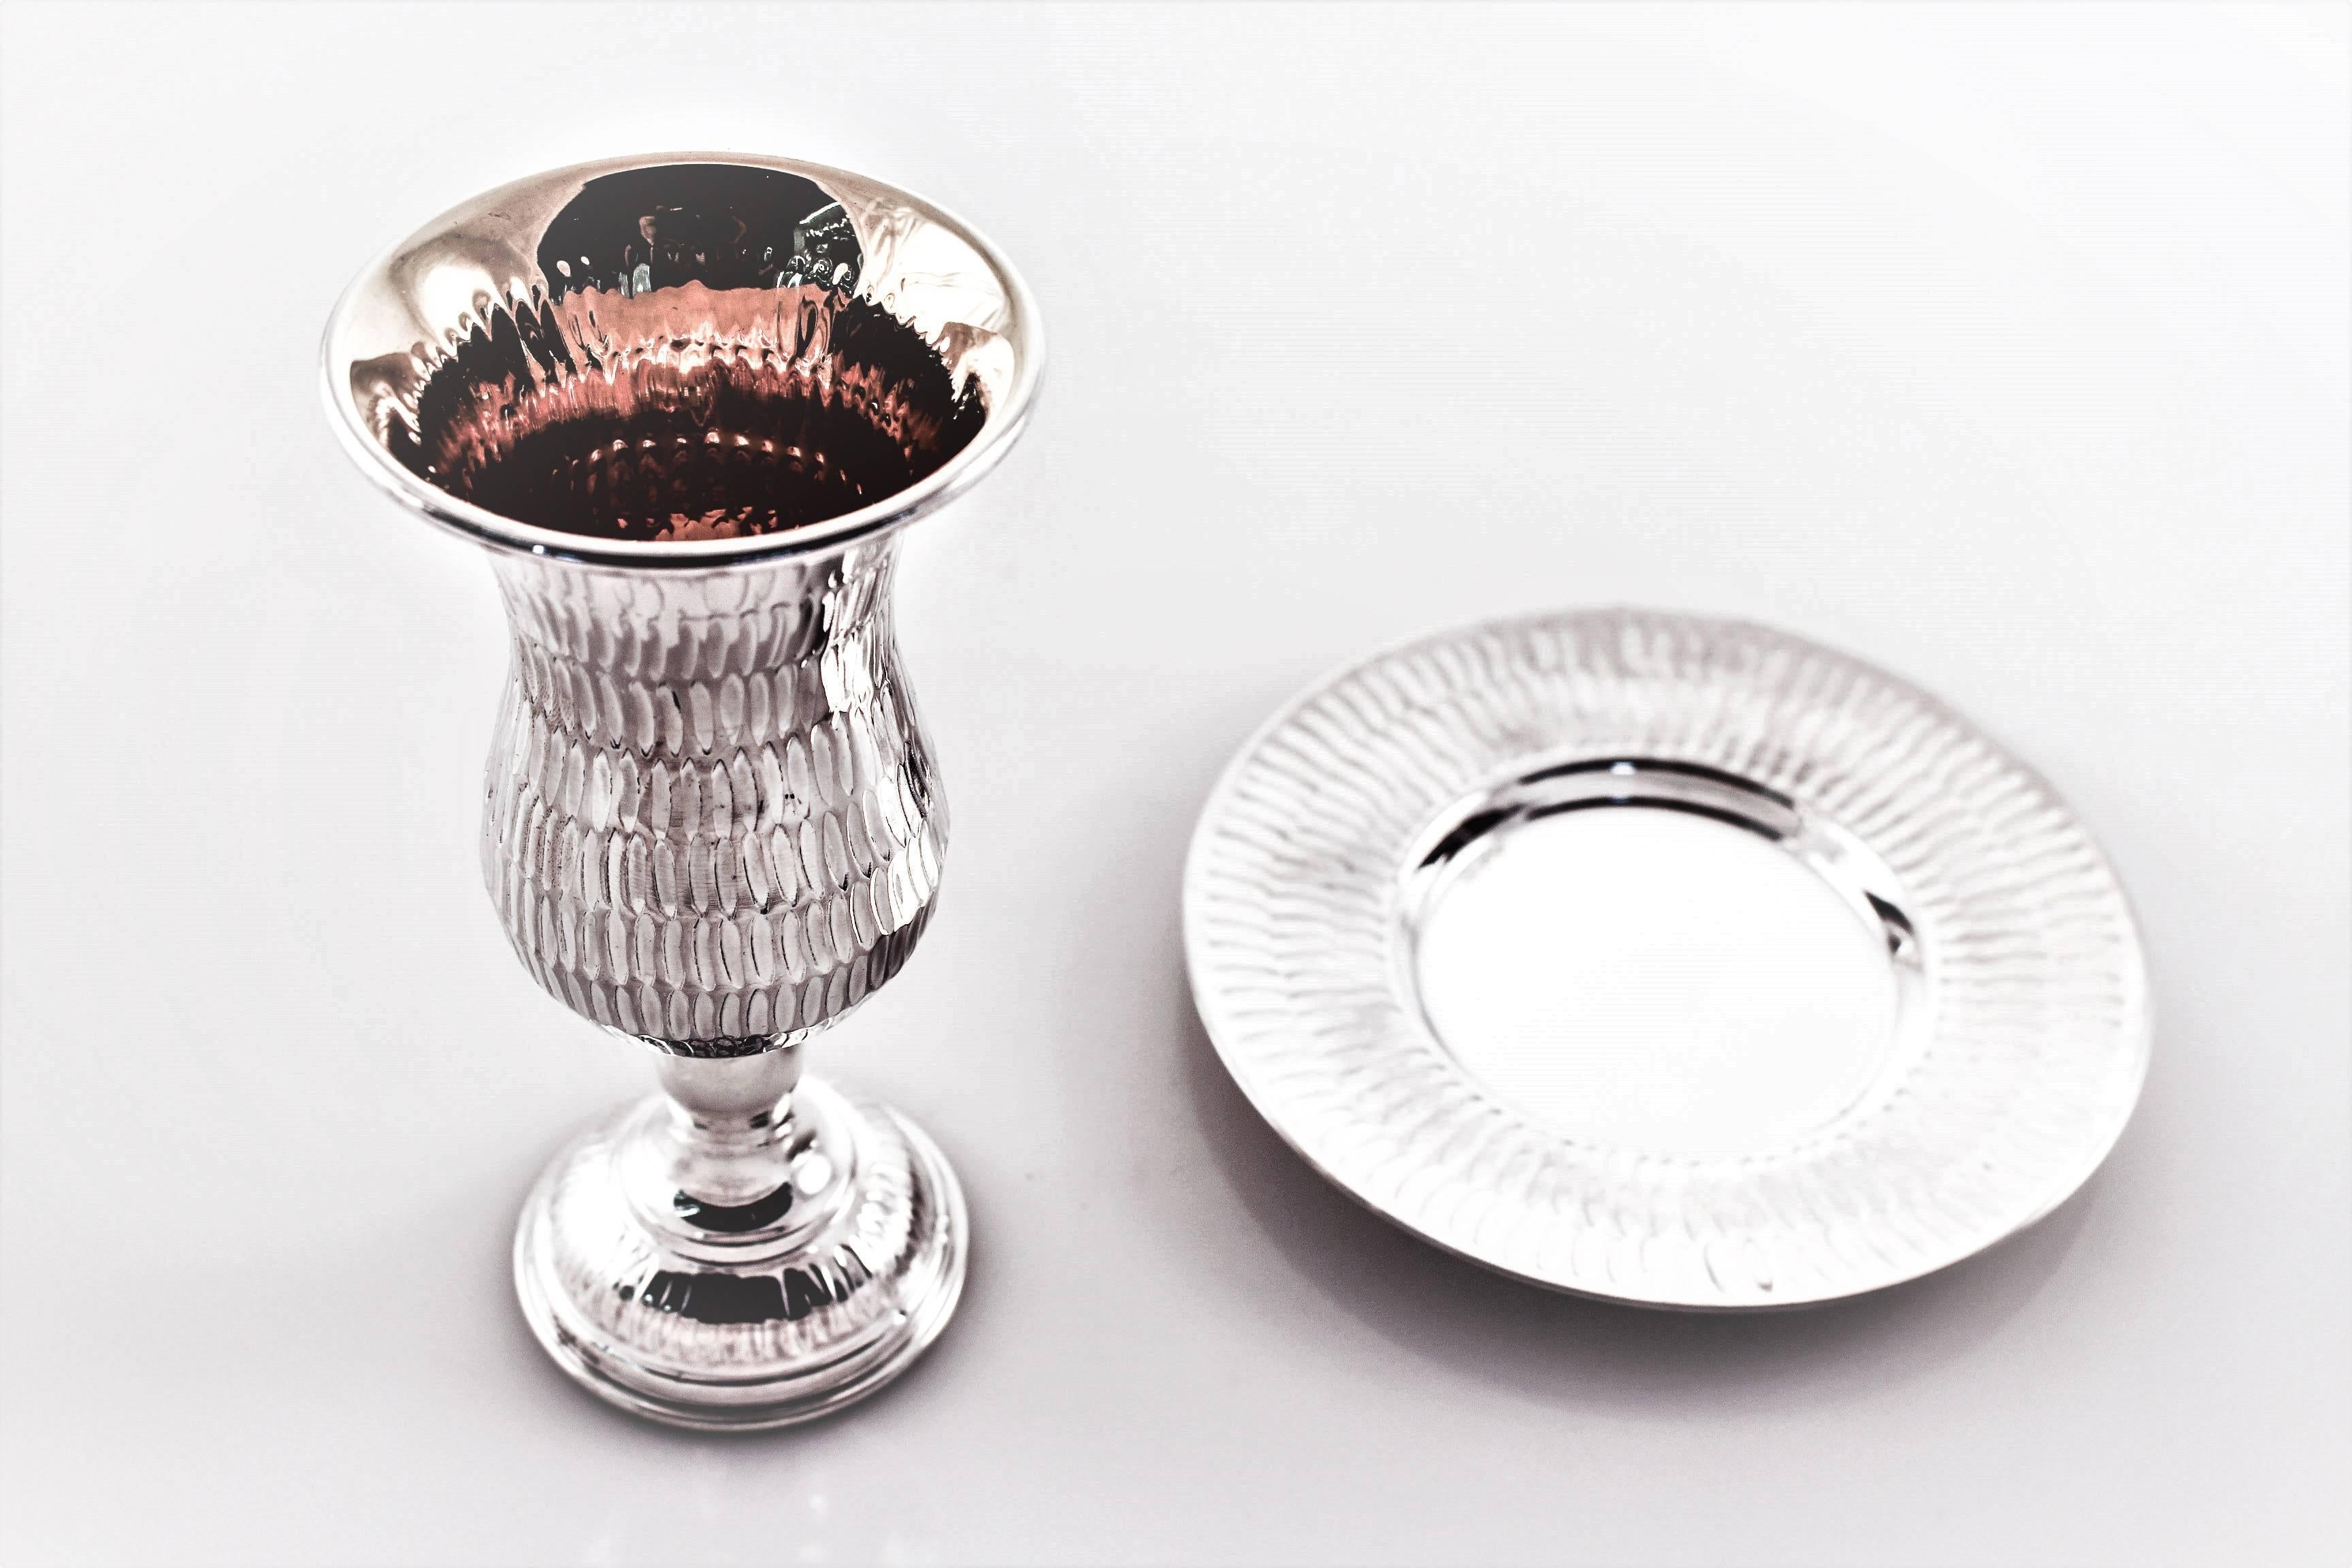 The traditions may be thousands of years old but the look is very contemporary! This lovely goblet and plate have a young, modern feel. A hammered-like texture that looks like snake skin. Great for your sabbath and holiday dinners. L’Chaim!